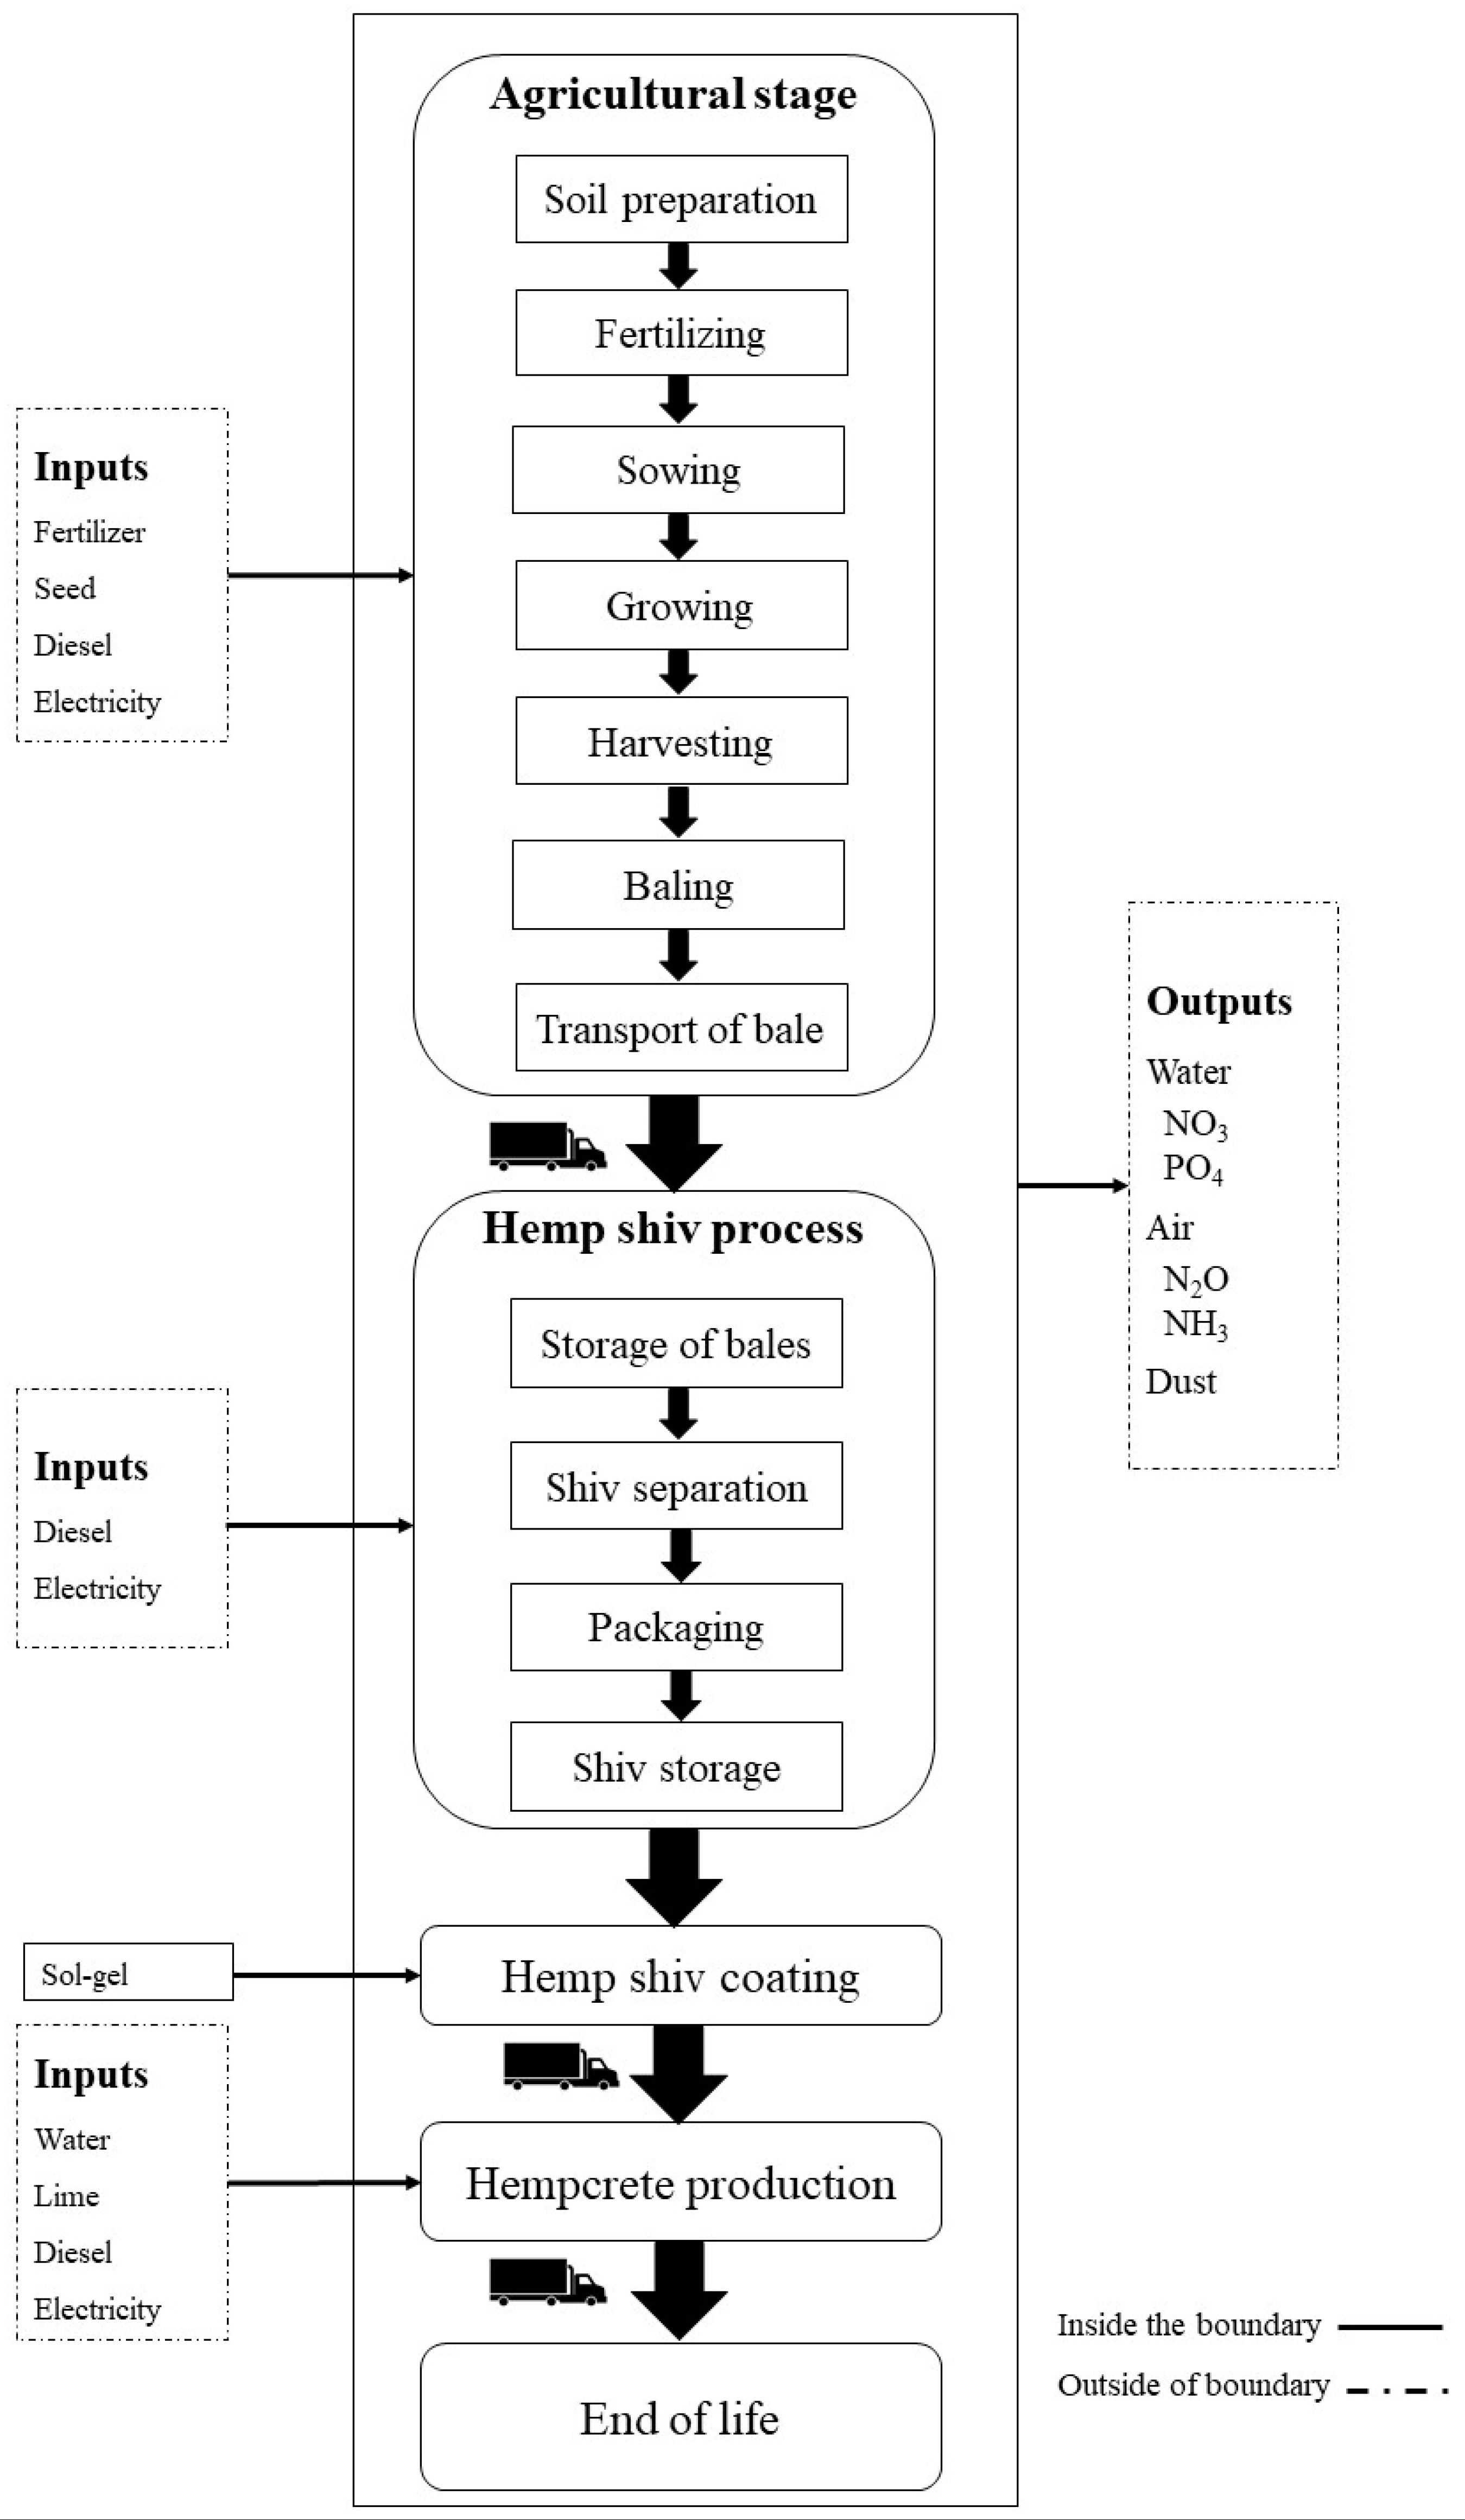 Materials Free Full Text Regionalised Life Cycle Assessment Of Bio Based Materials In Construction The Case Of Hemp Shiv Treated With Sol Gel Coatings Html